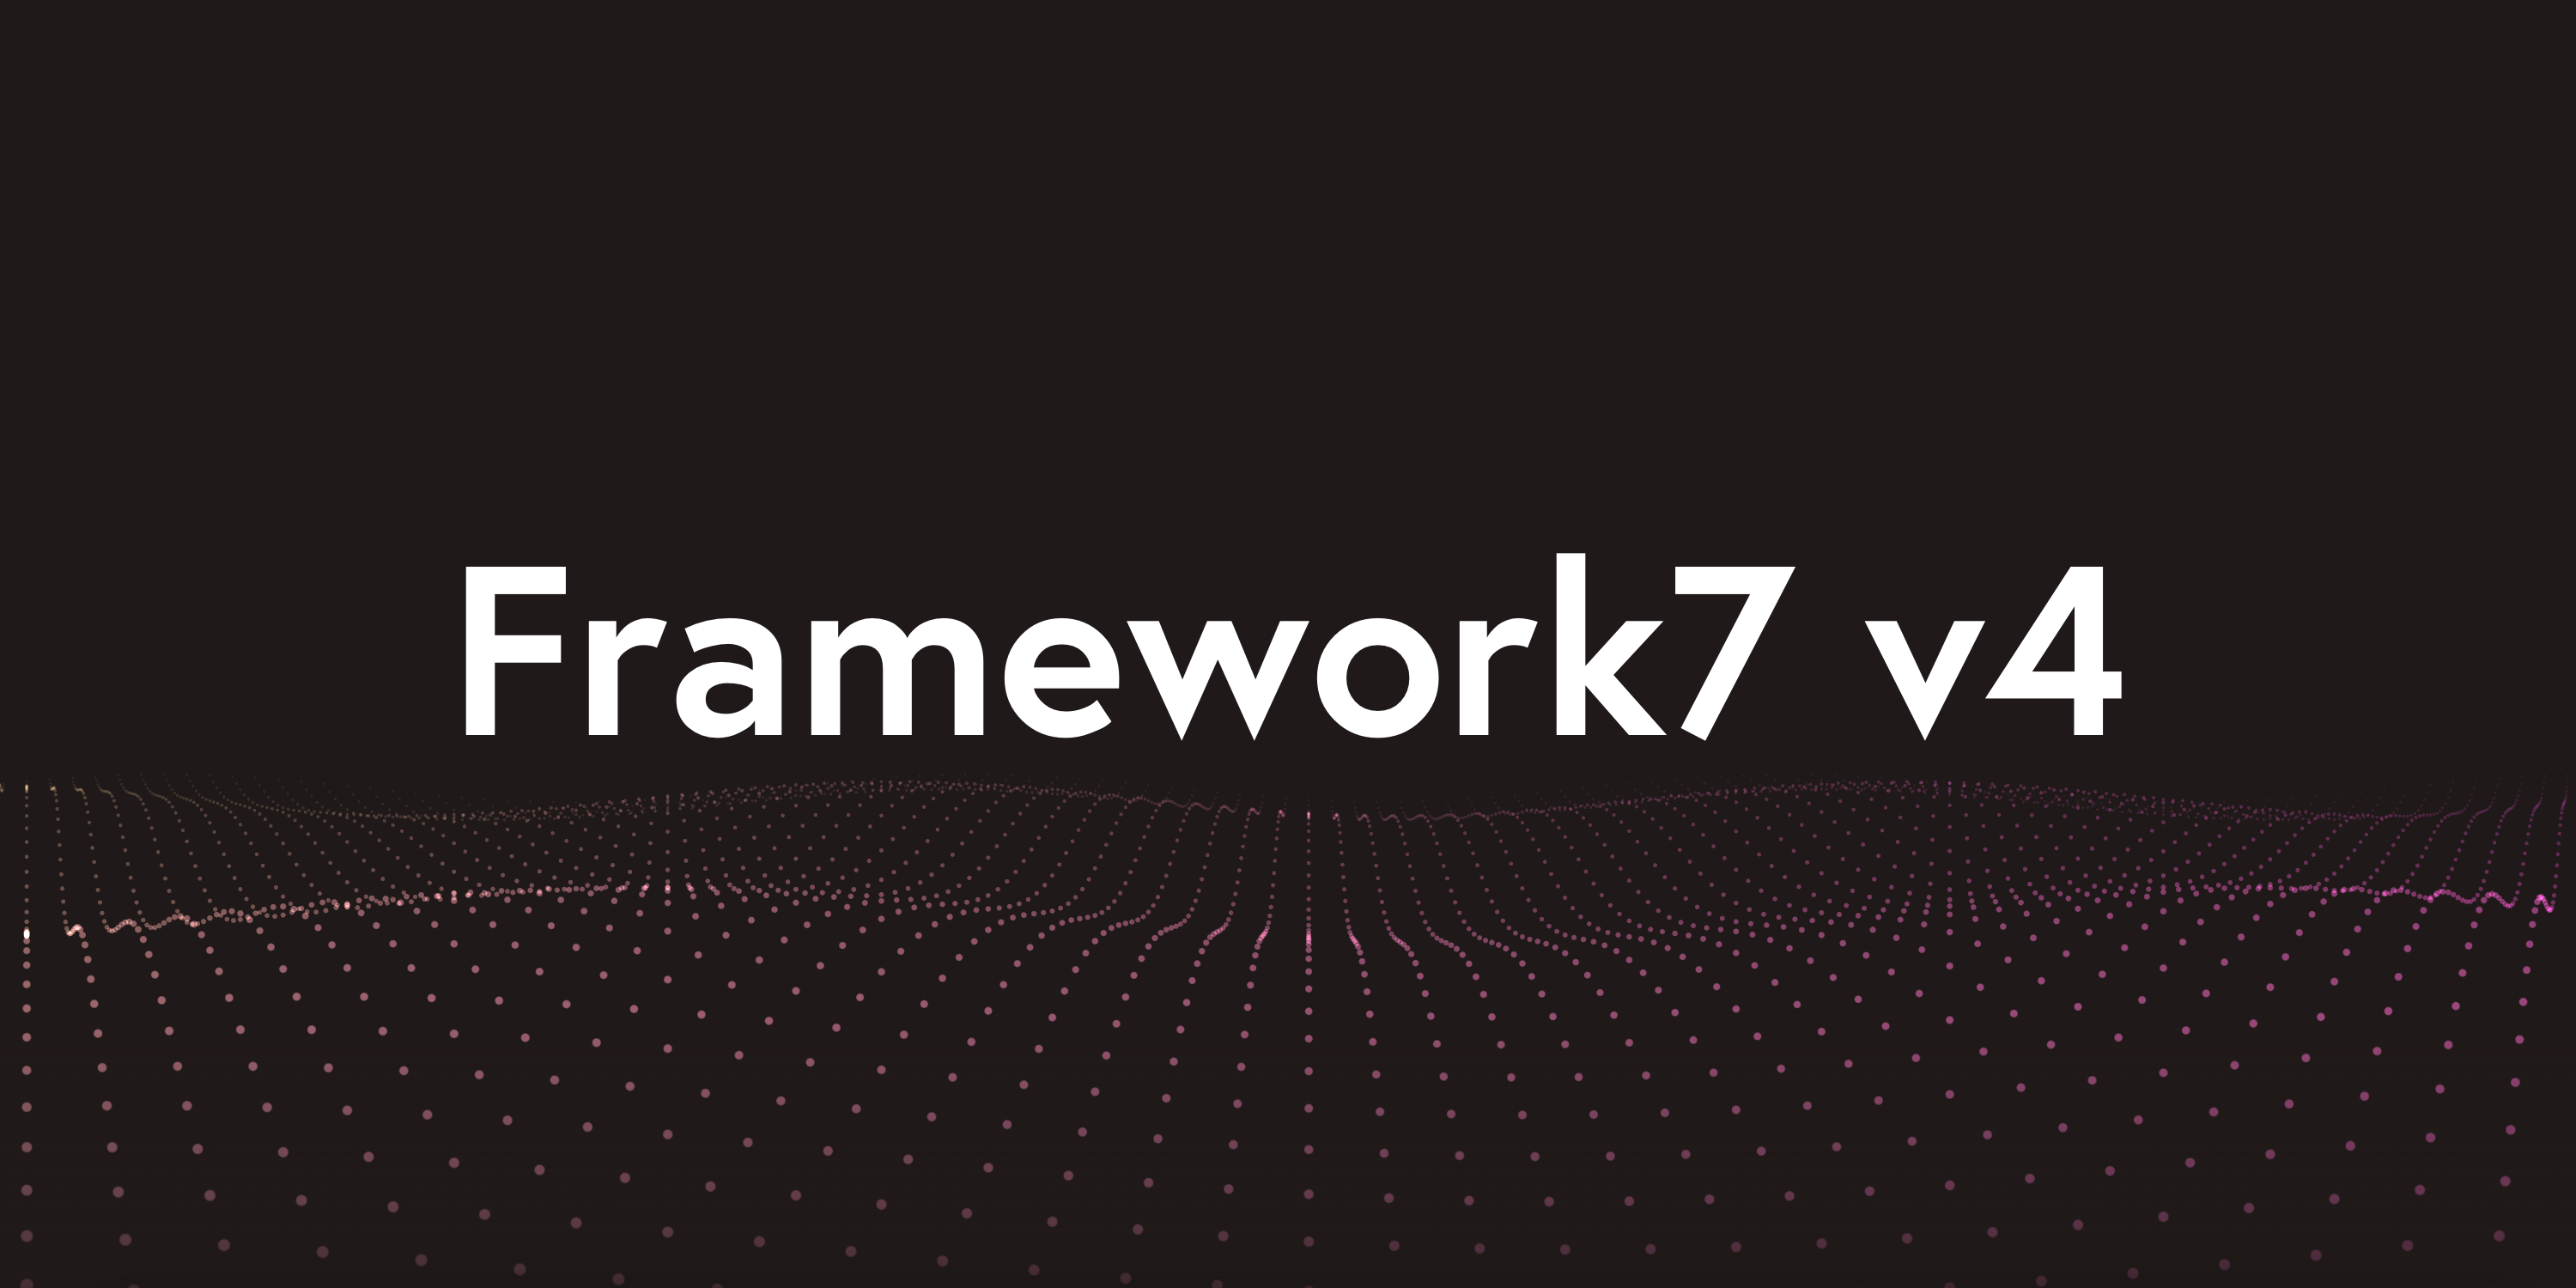 The Best Framework7 Yet. What Is New In v4